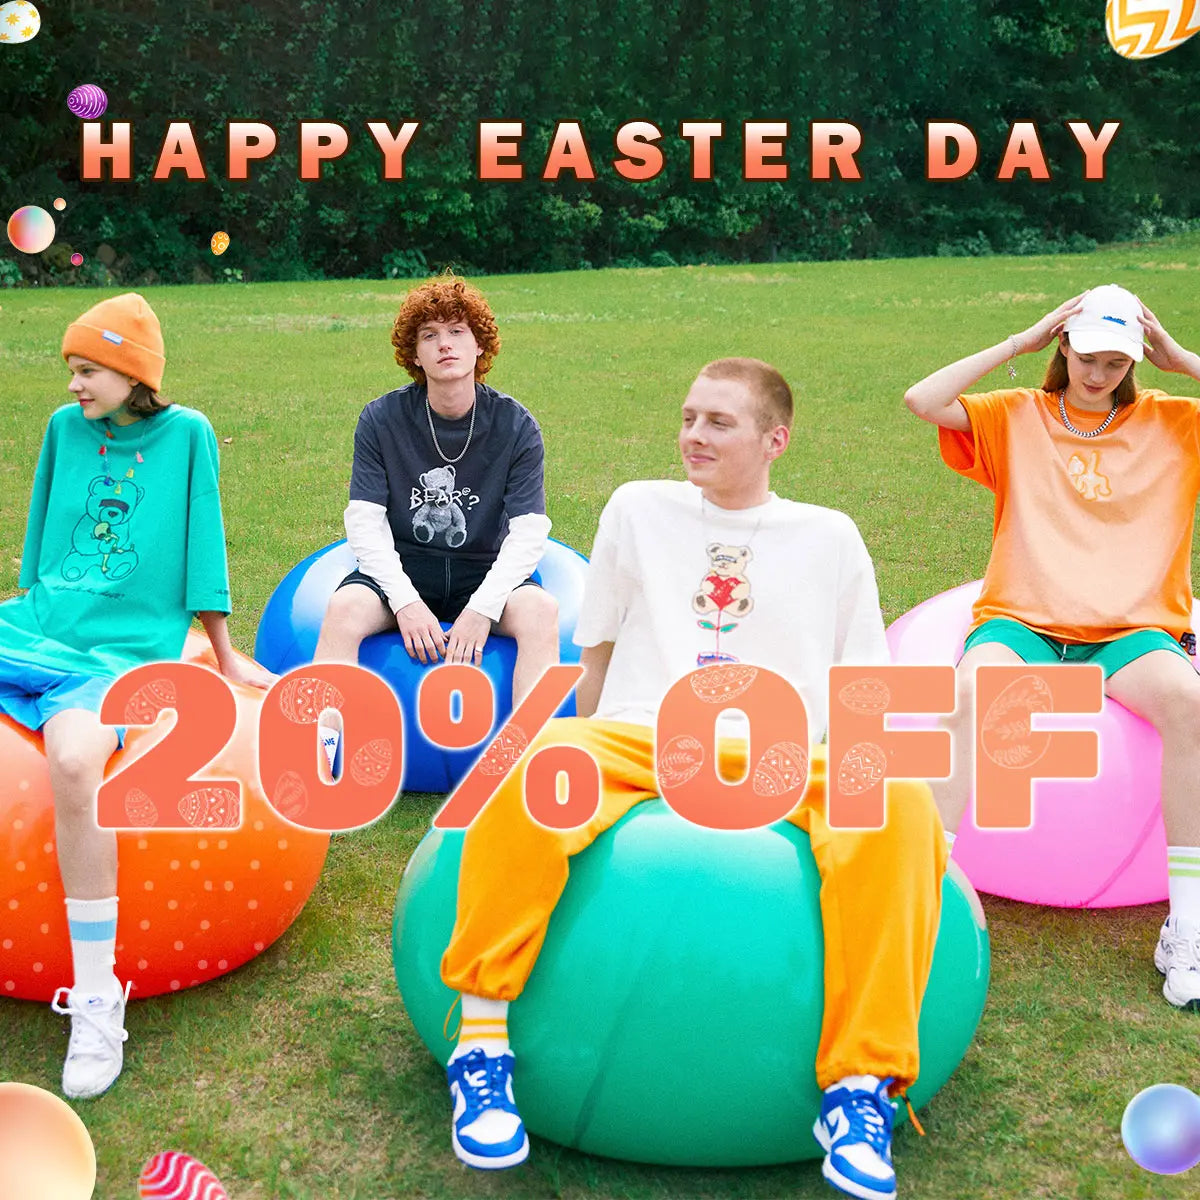 Easter Day Sale